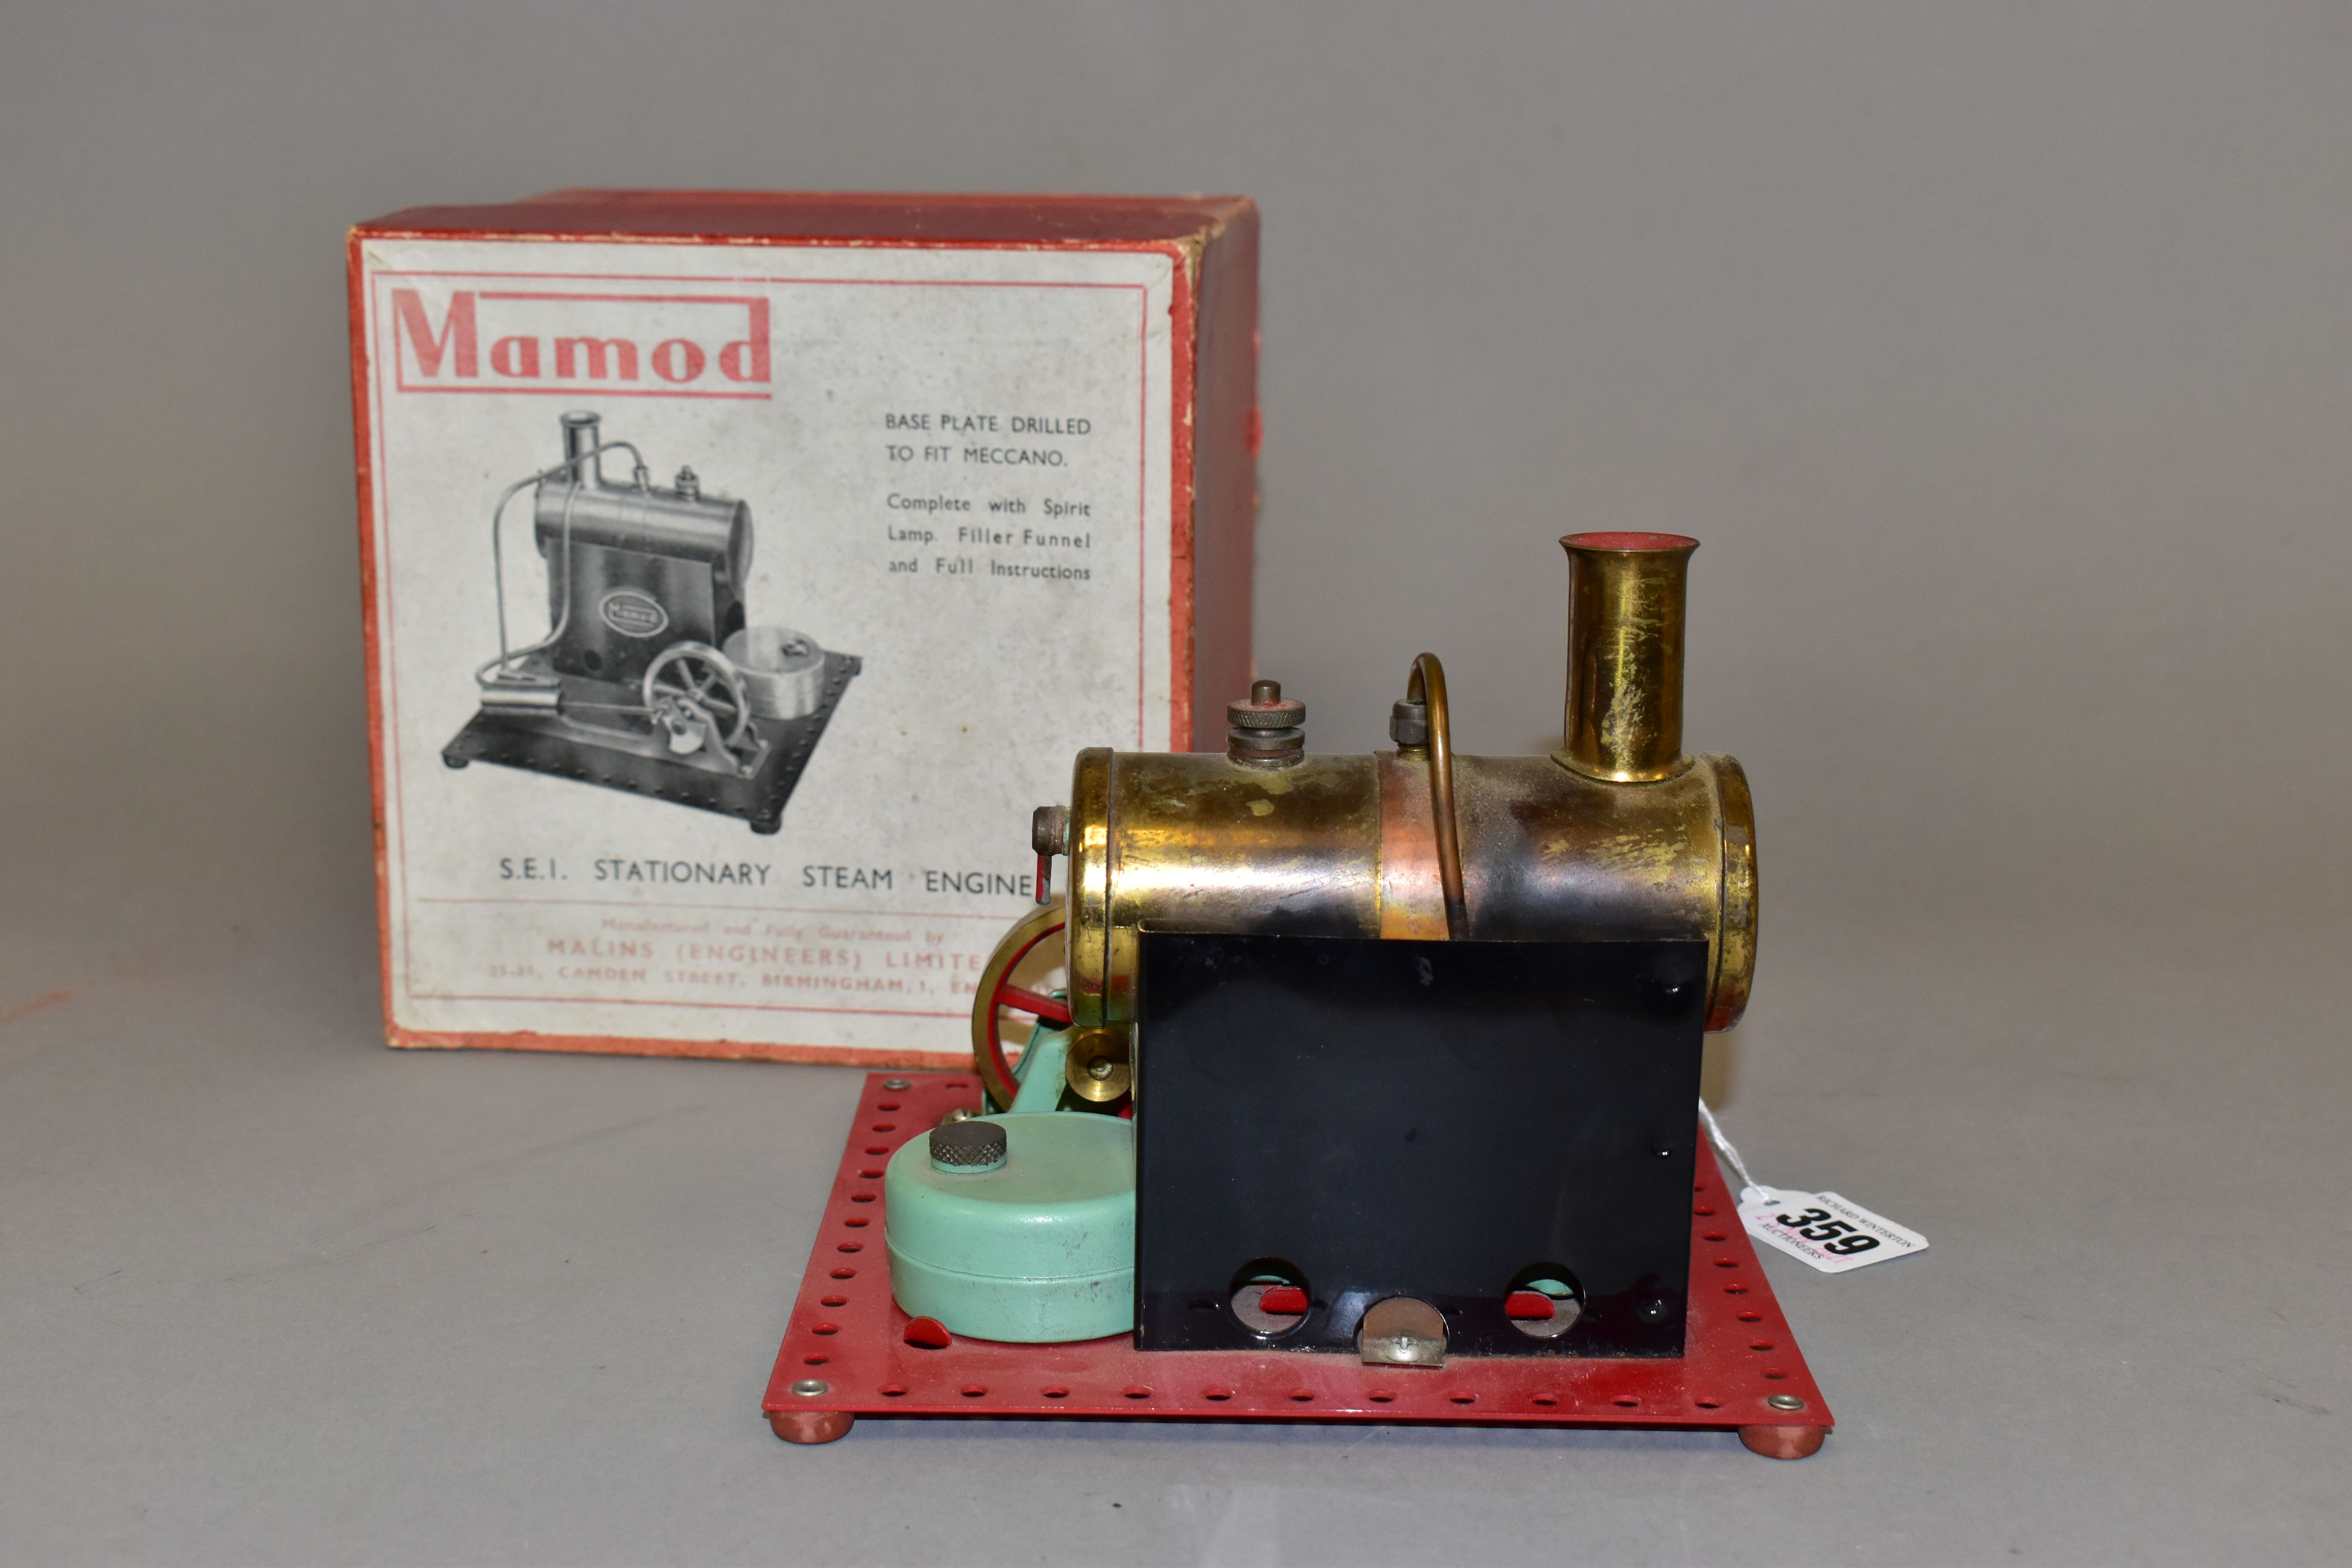 A BOXED MAMOD LIVE STEAM STATIONARY ENGINE, No.S.E.1., not tested, appears largely complete with - Image 4 of 6